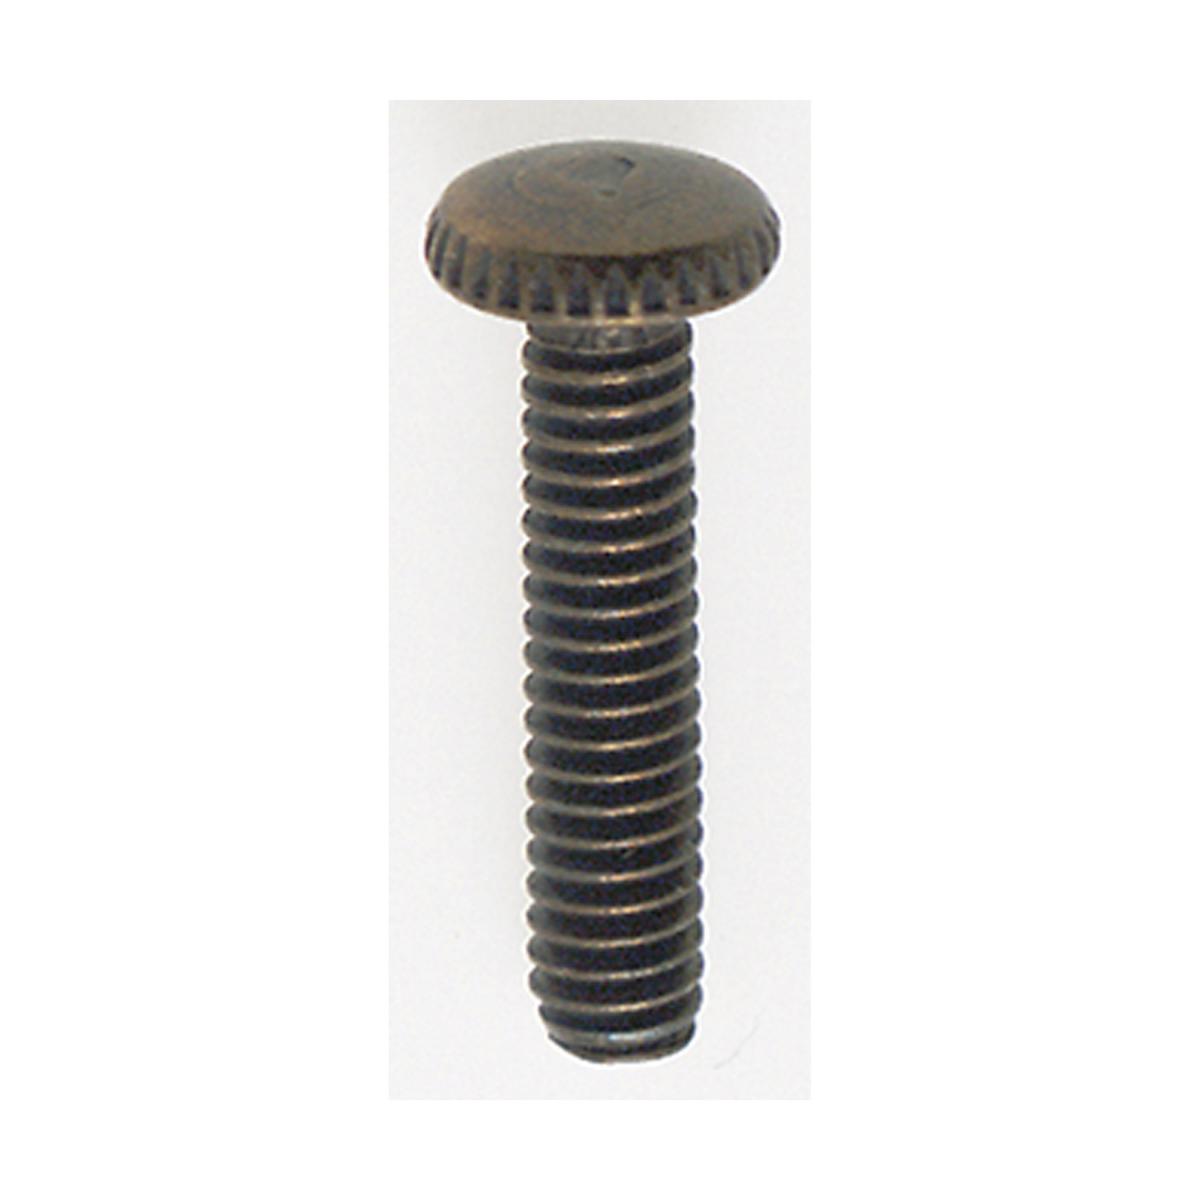 Satco 90-060 Steel Knurled Head Thumb Screws 8/32 3/4" Length Antique Brass Plated Finish